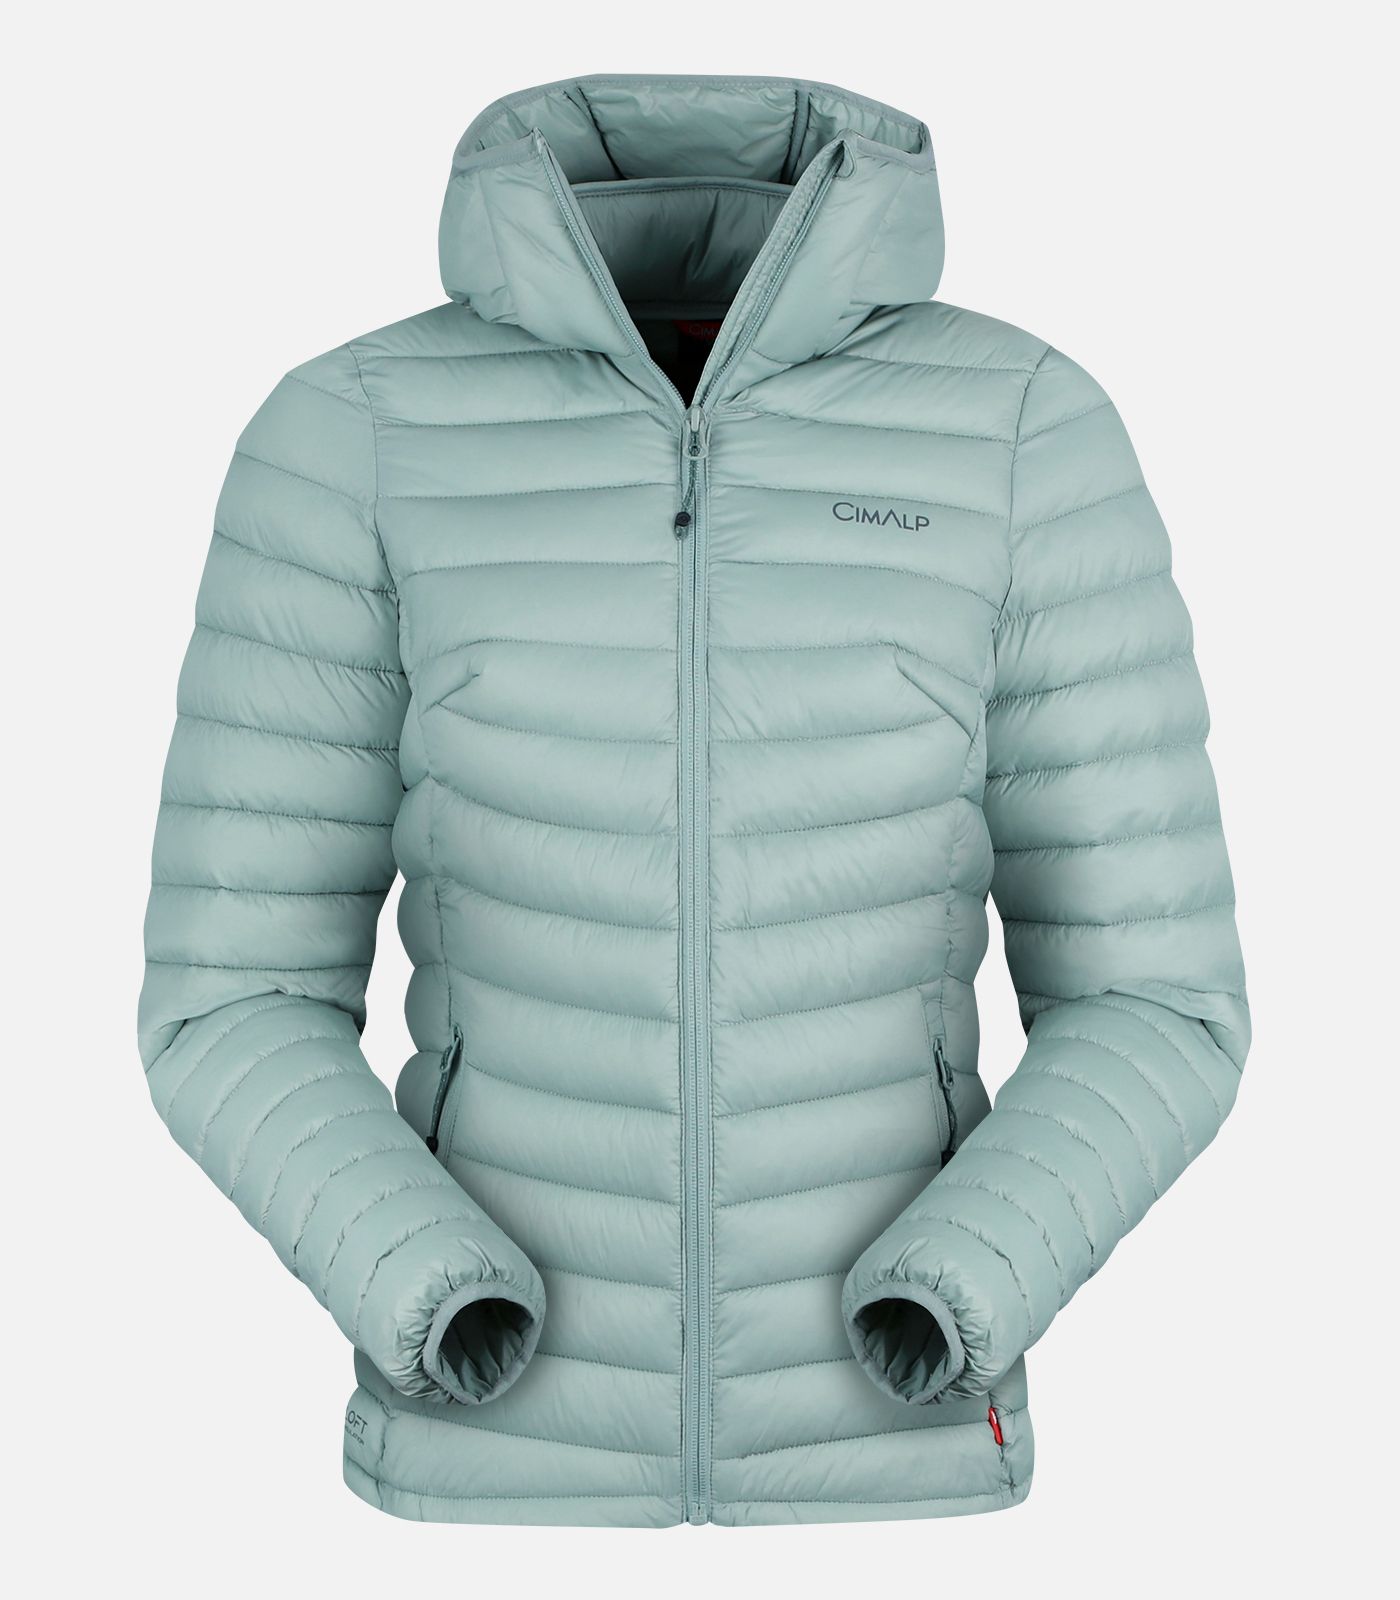 Puffer jacket in CIMALOFT® with hood